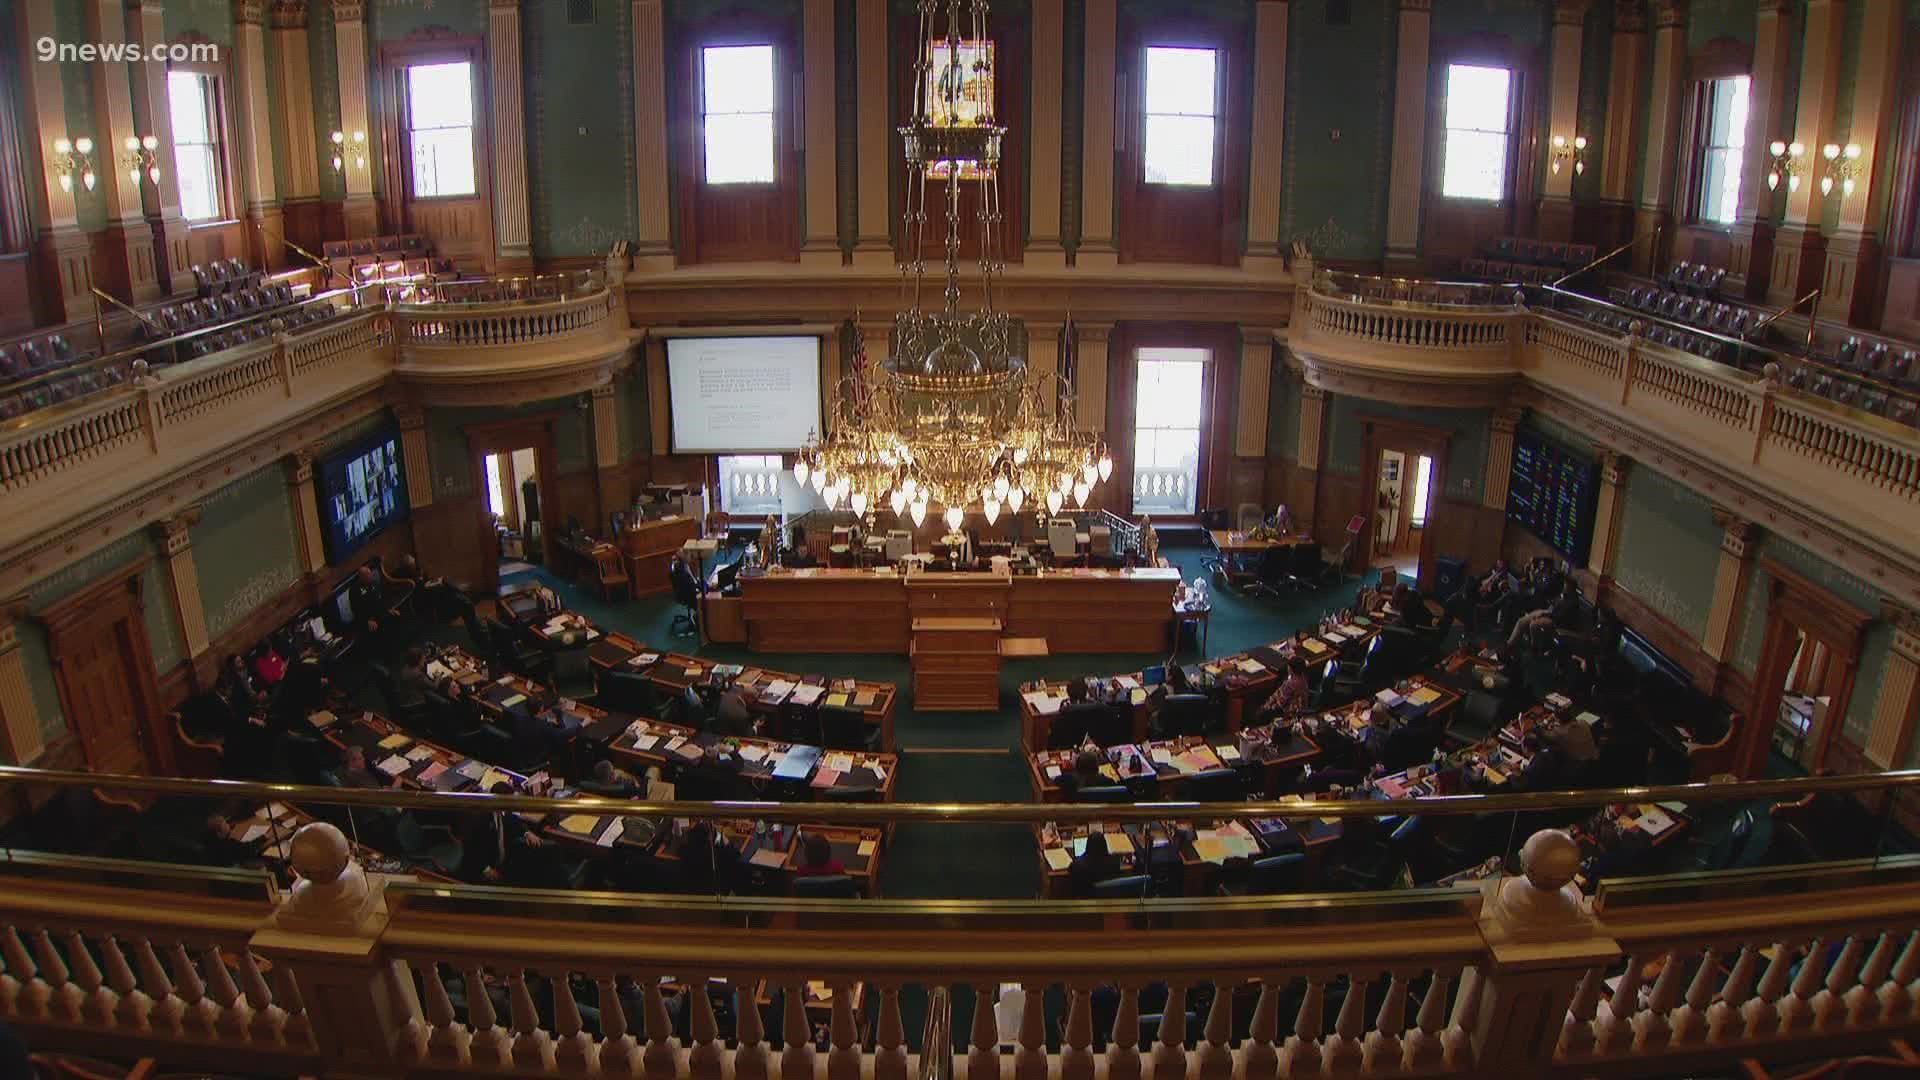 The legislation will have its third hearing in the State House of Representatives on Monday.